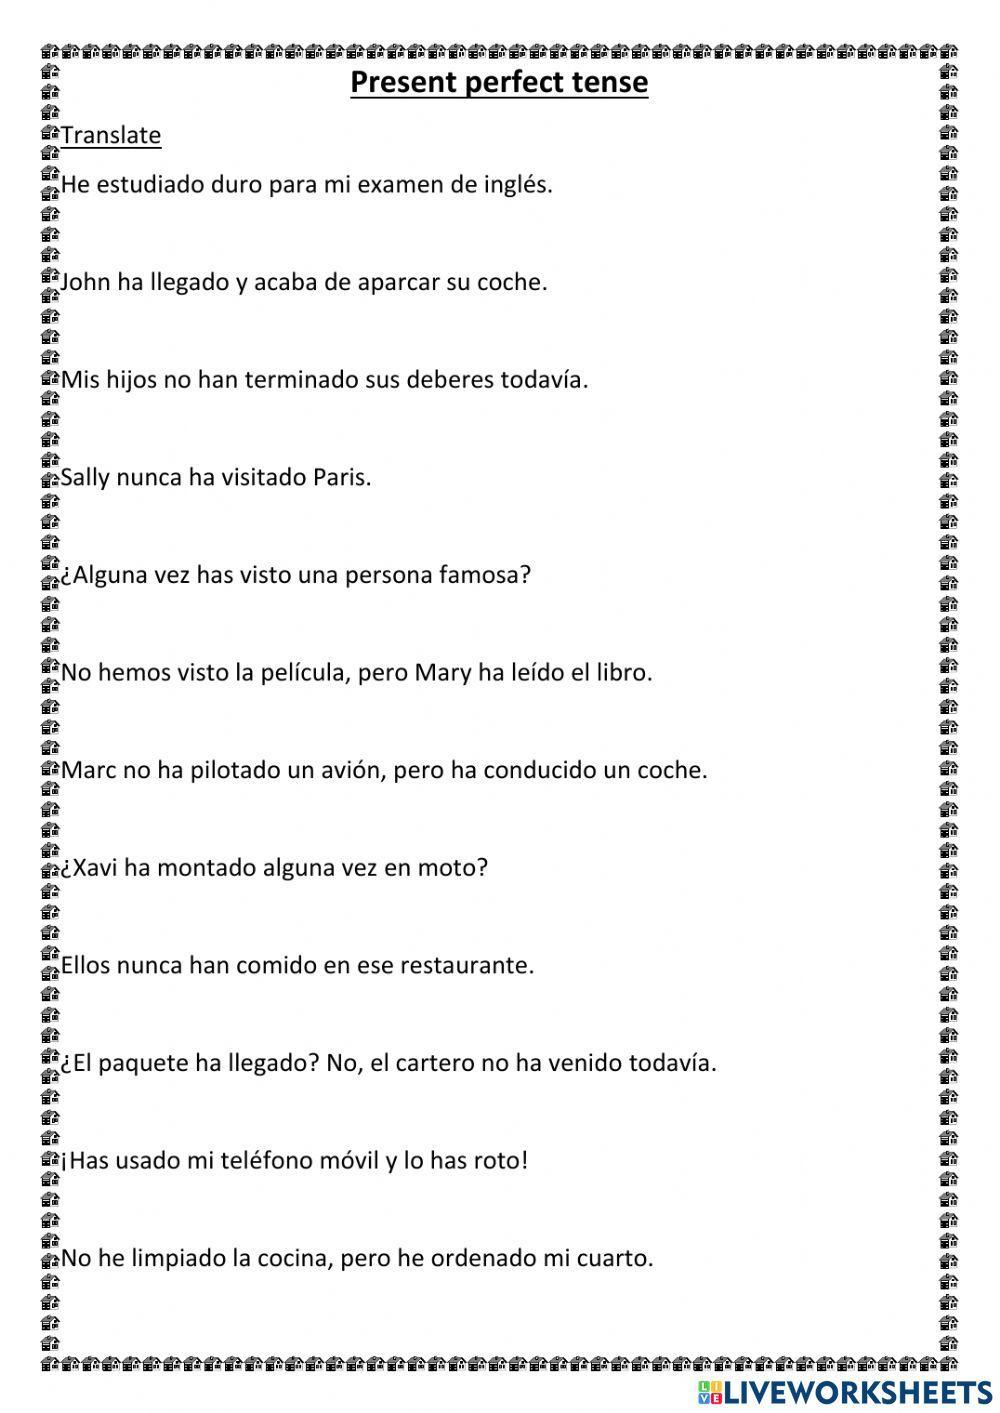 Translate Present Perfect tense from Spanish